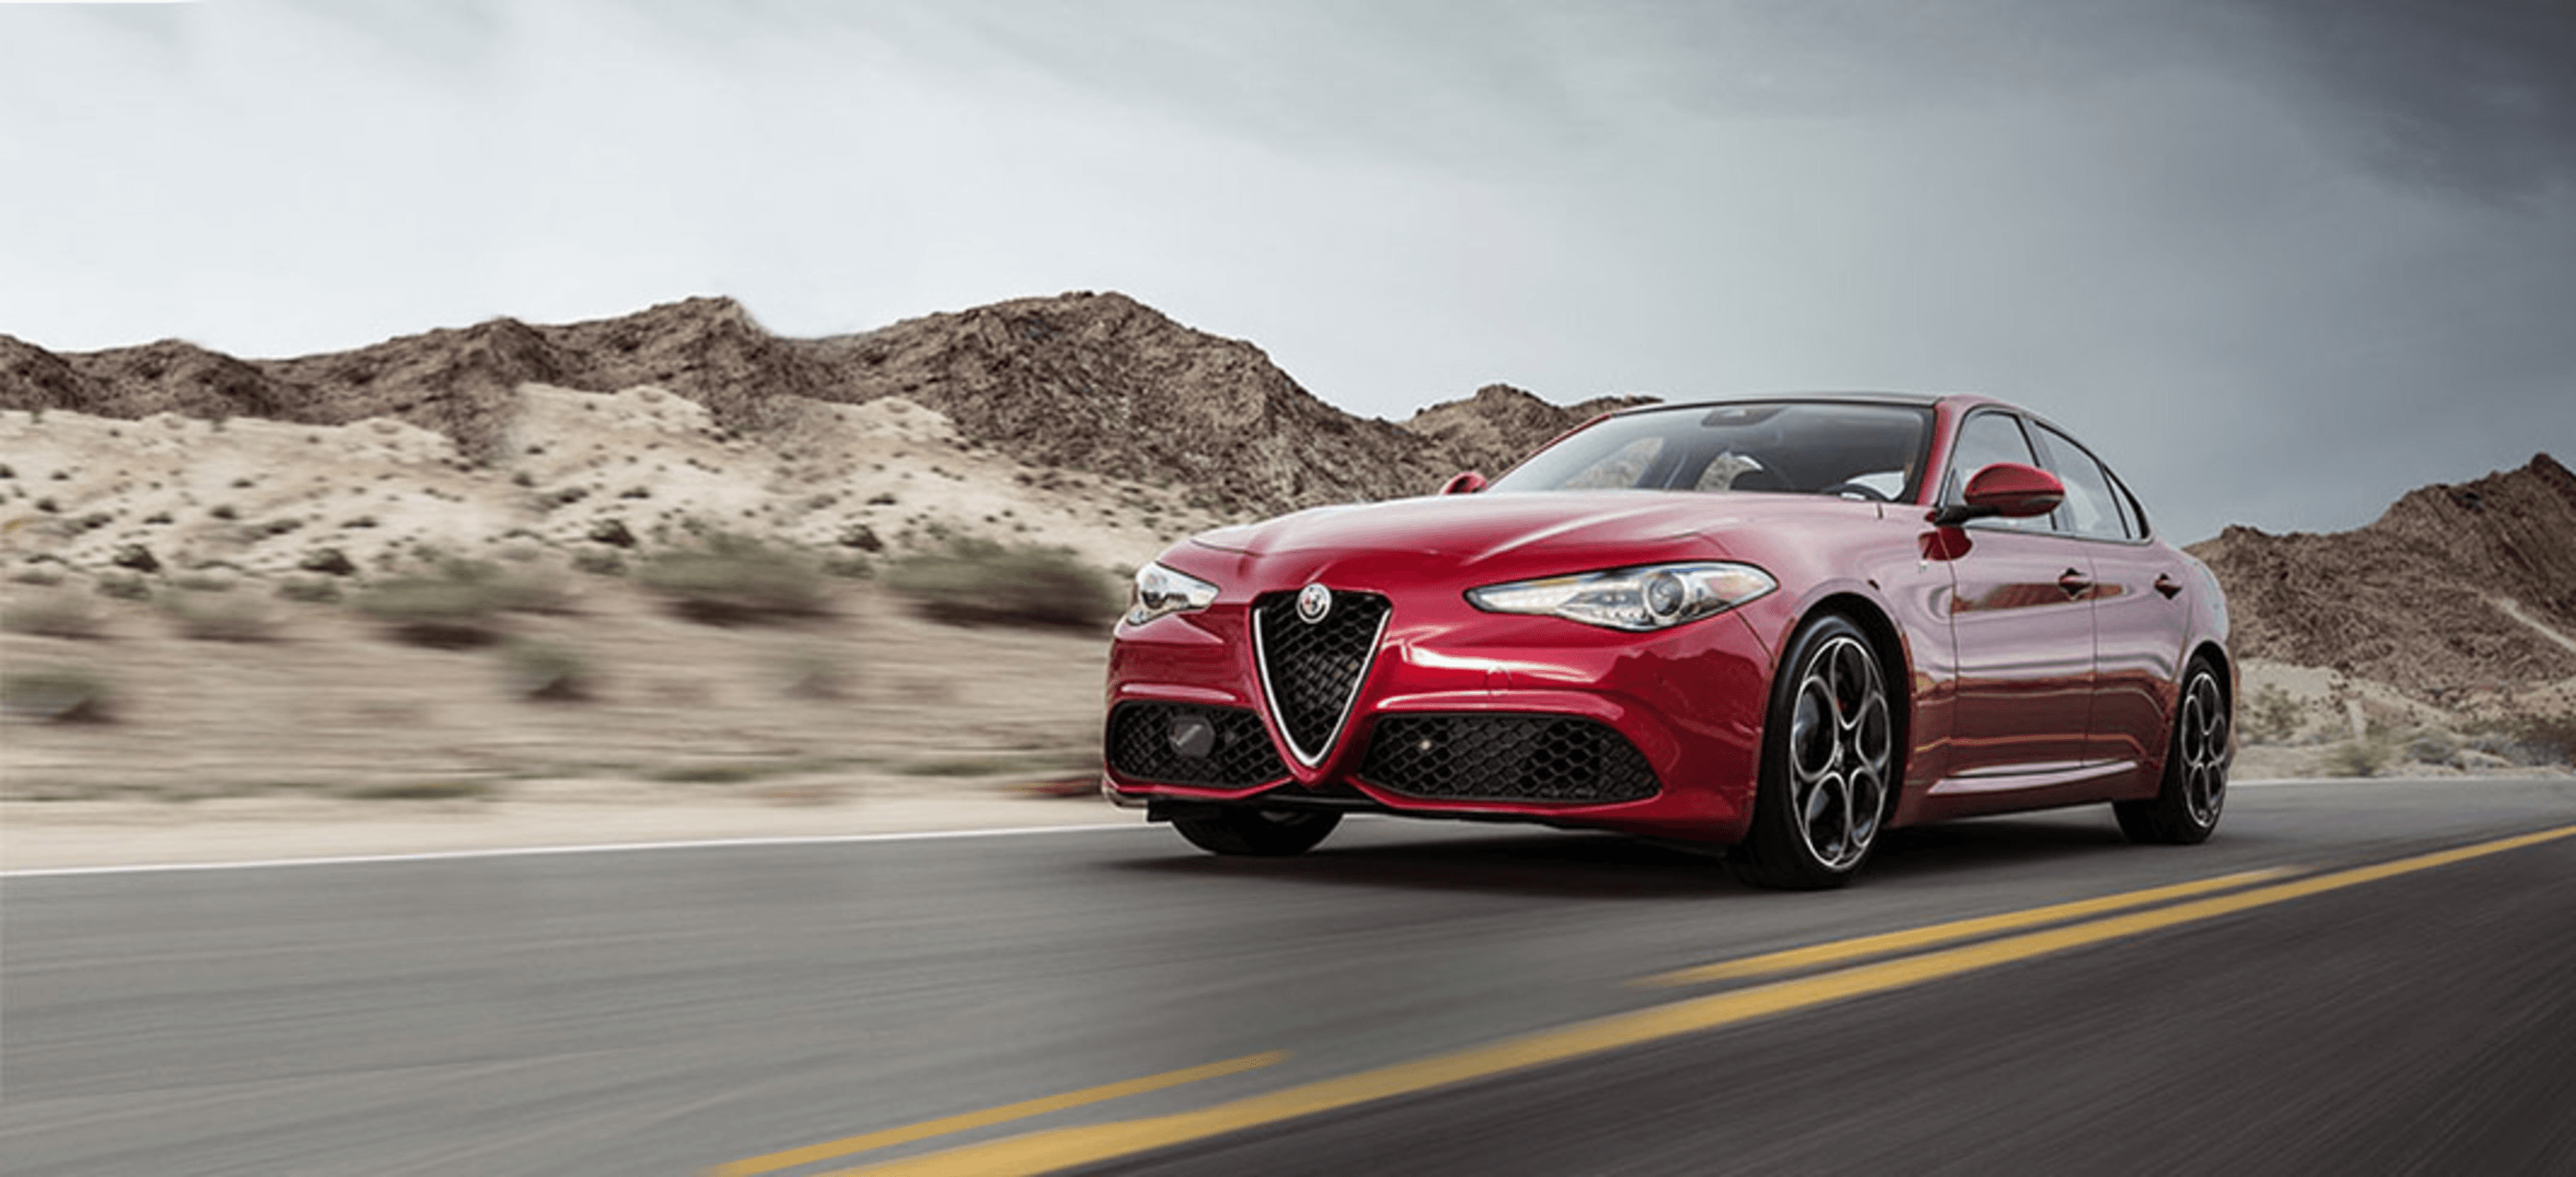 Front view of a red 2022 Alfa Romeo Giulia driving down a road.